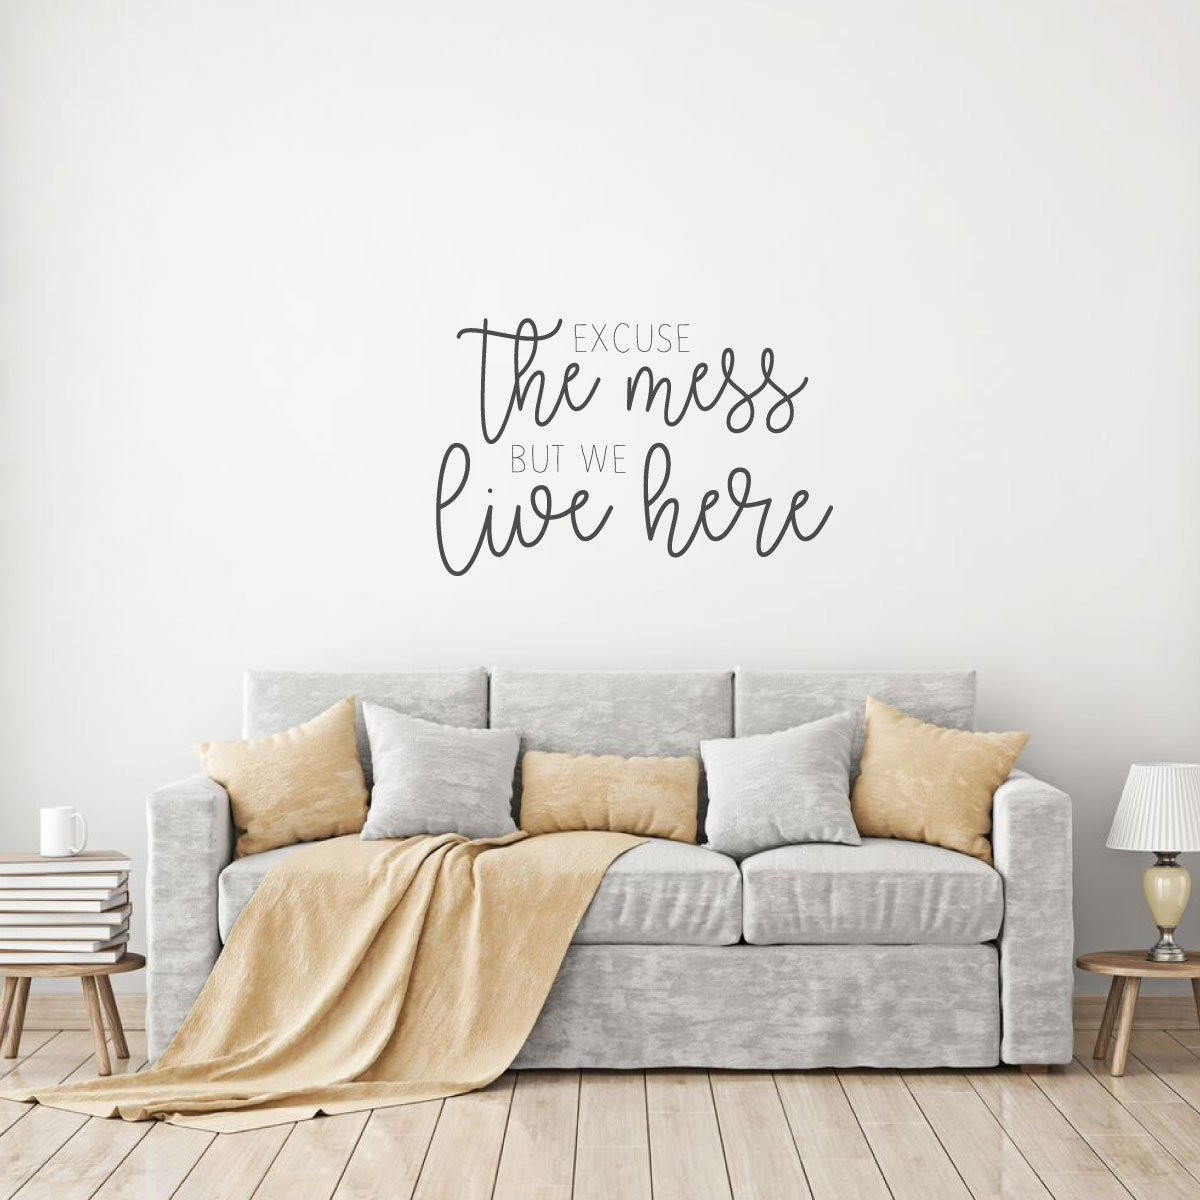 Wall Sayings For Living Room
 Excuse the Mess Quote for Living Room Vinyl Home Decor